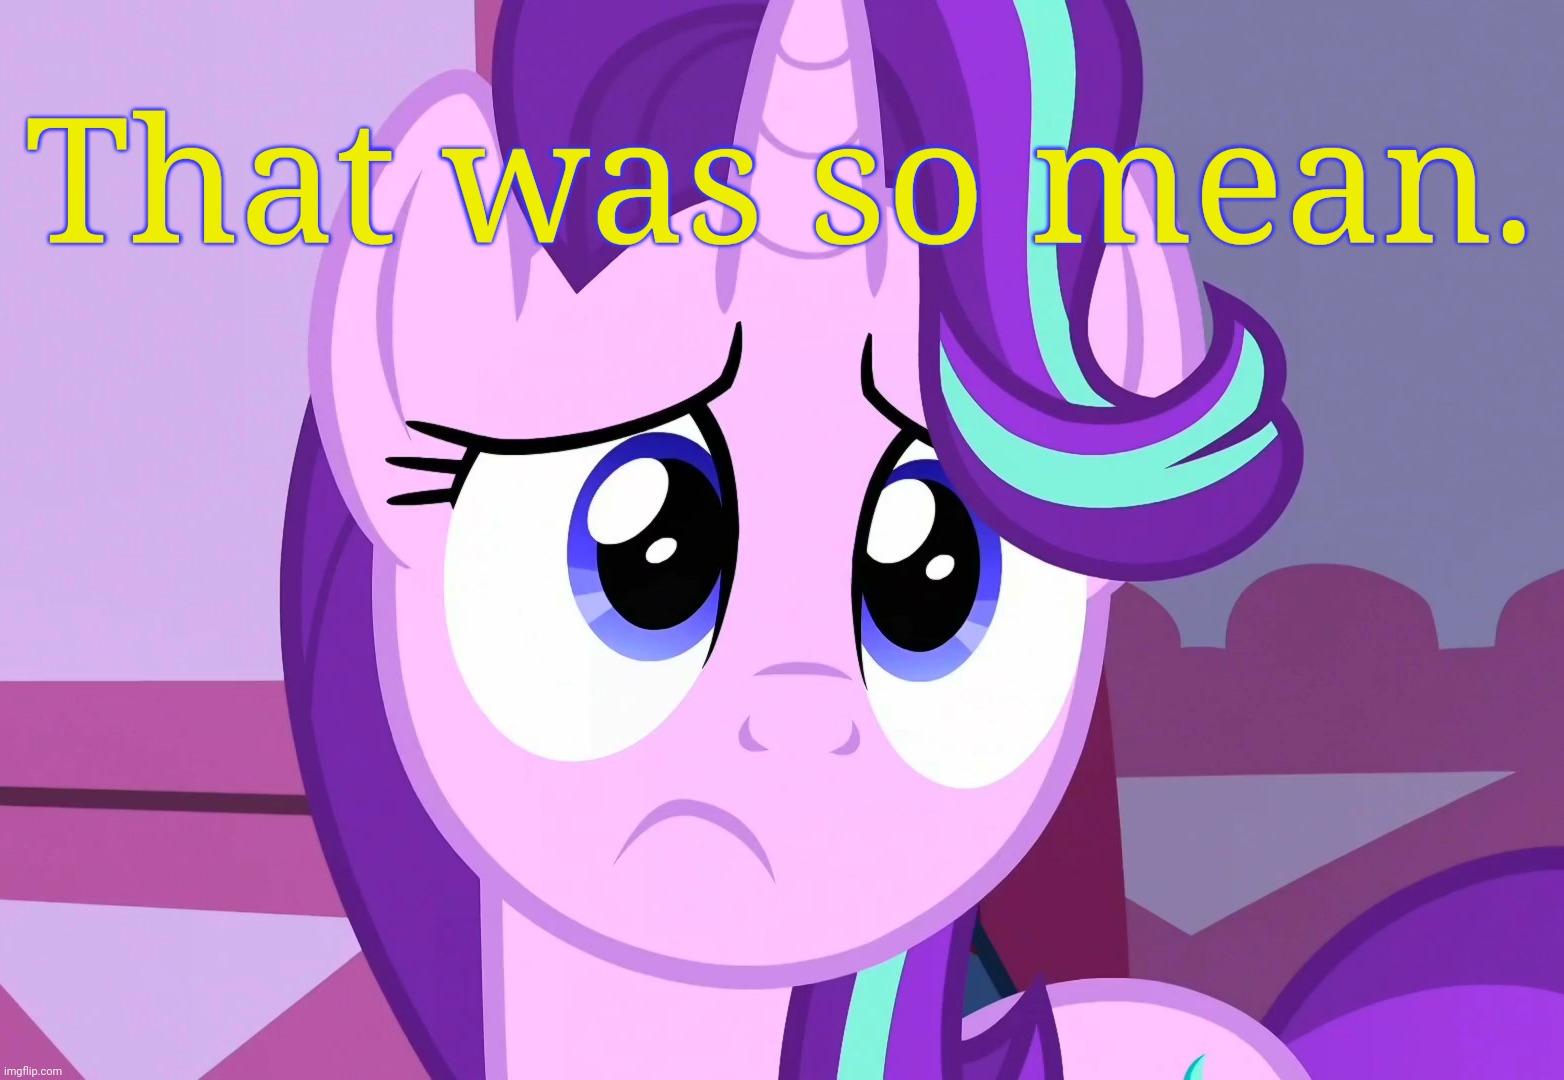 Sadlight Glimmer (MLP) | That was so mean. | image tagged in sadlight glimmer mlp | made w/ Imgflip meme maker